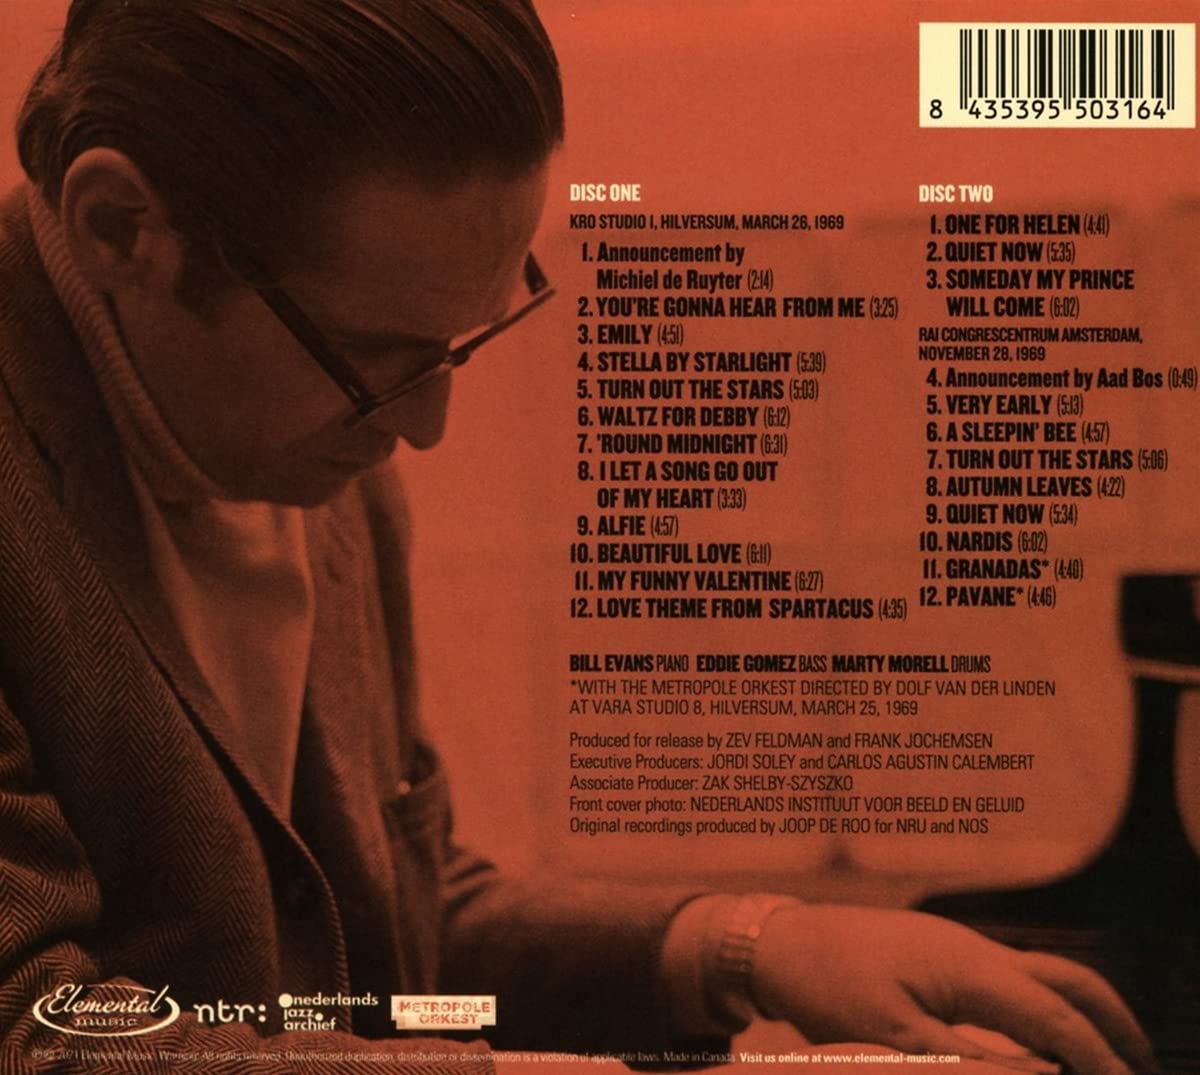 Bill Evans (빌 에반스) - Behind The Dikes: The 1969 Netherlands Recordings 